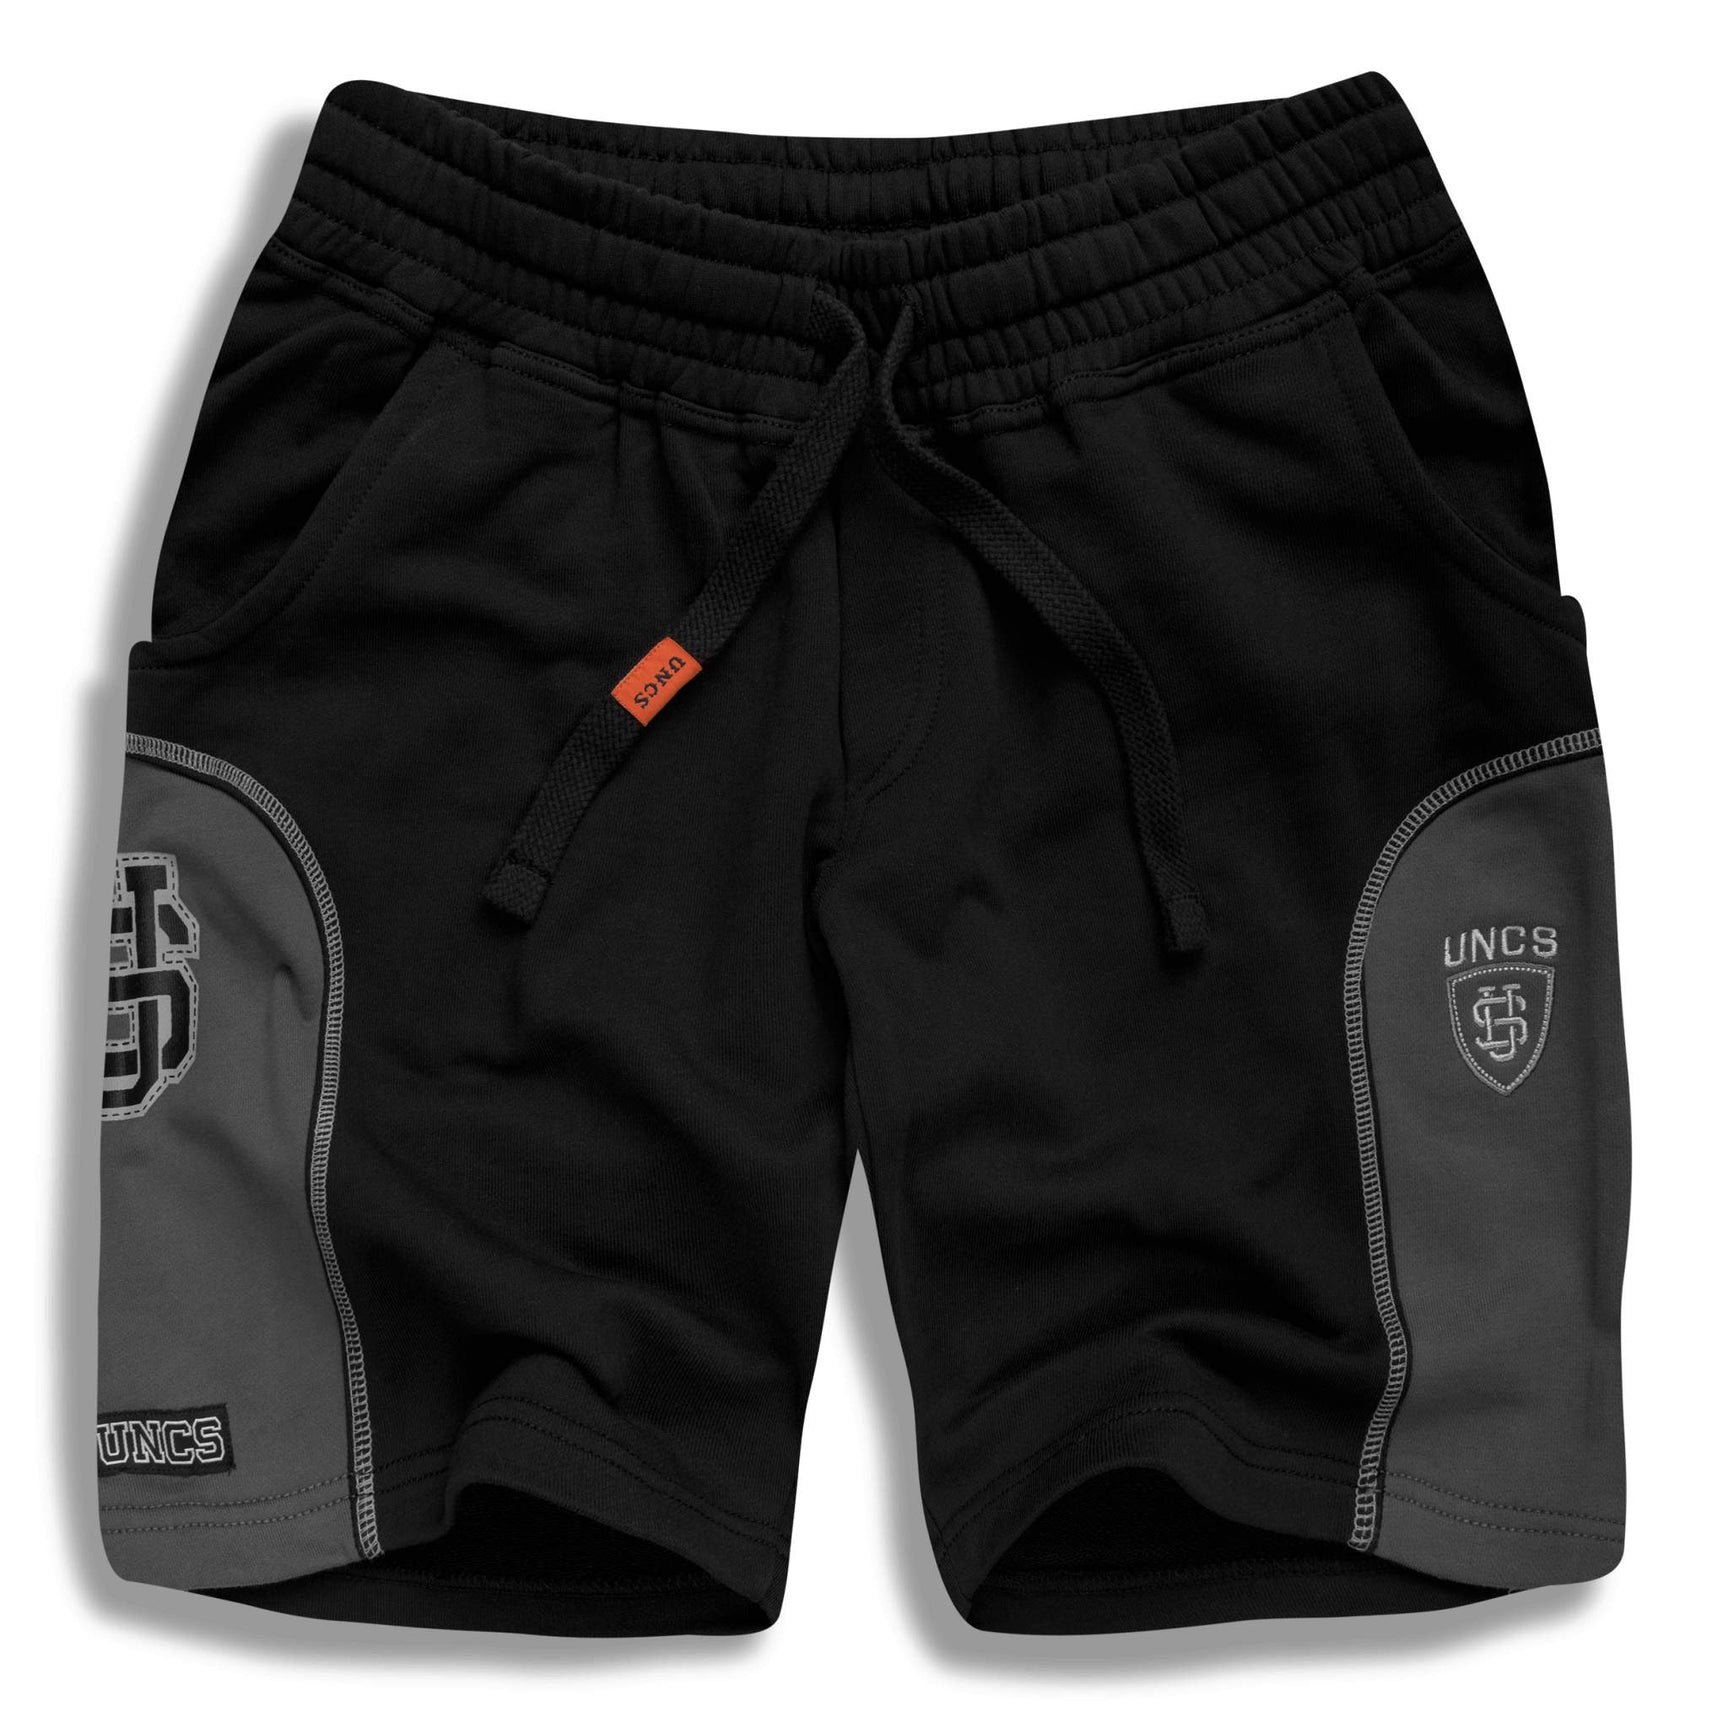 Men's Shorts | Unlimited Clothing Style – UNCS USA